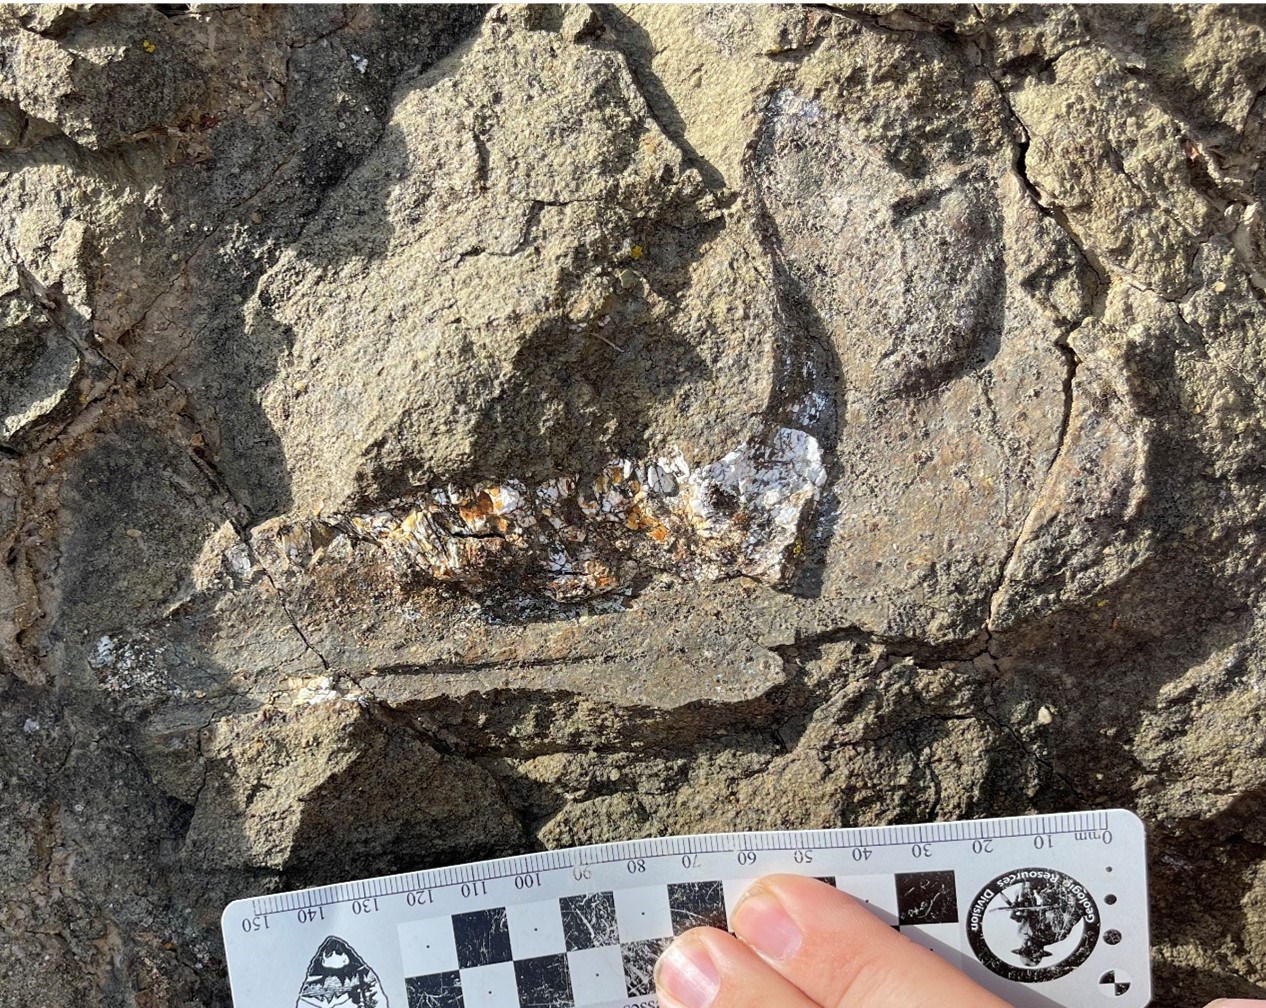 Photo of a fossil in a rock outcrop.